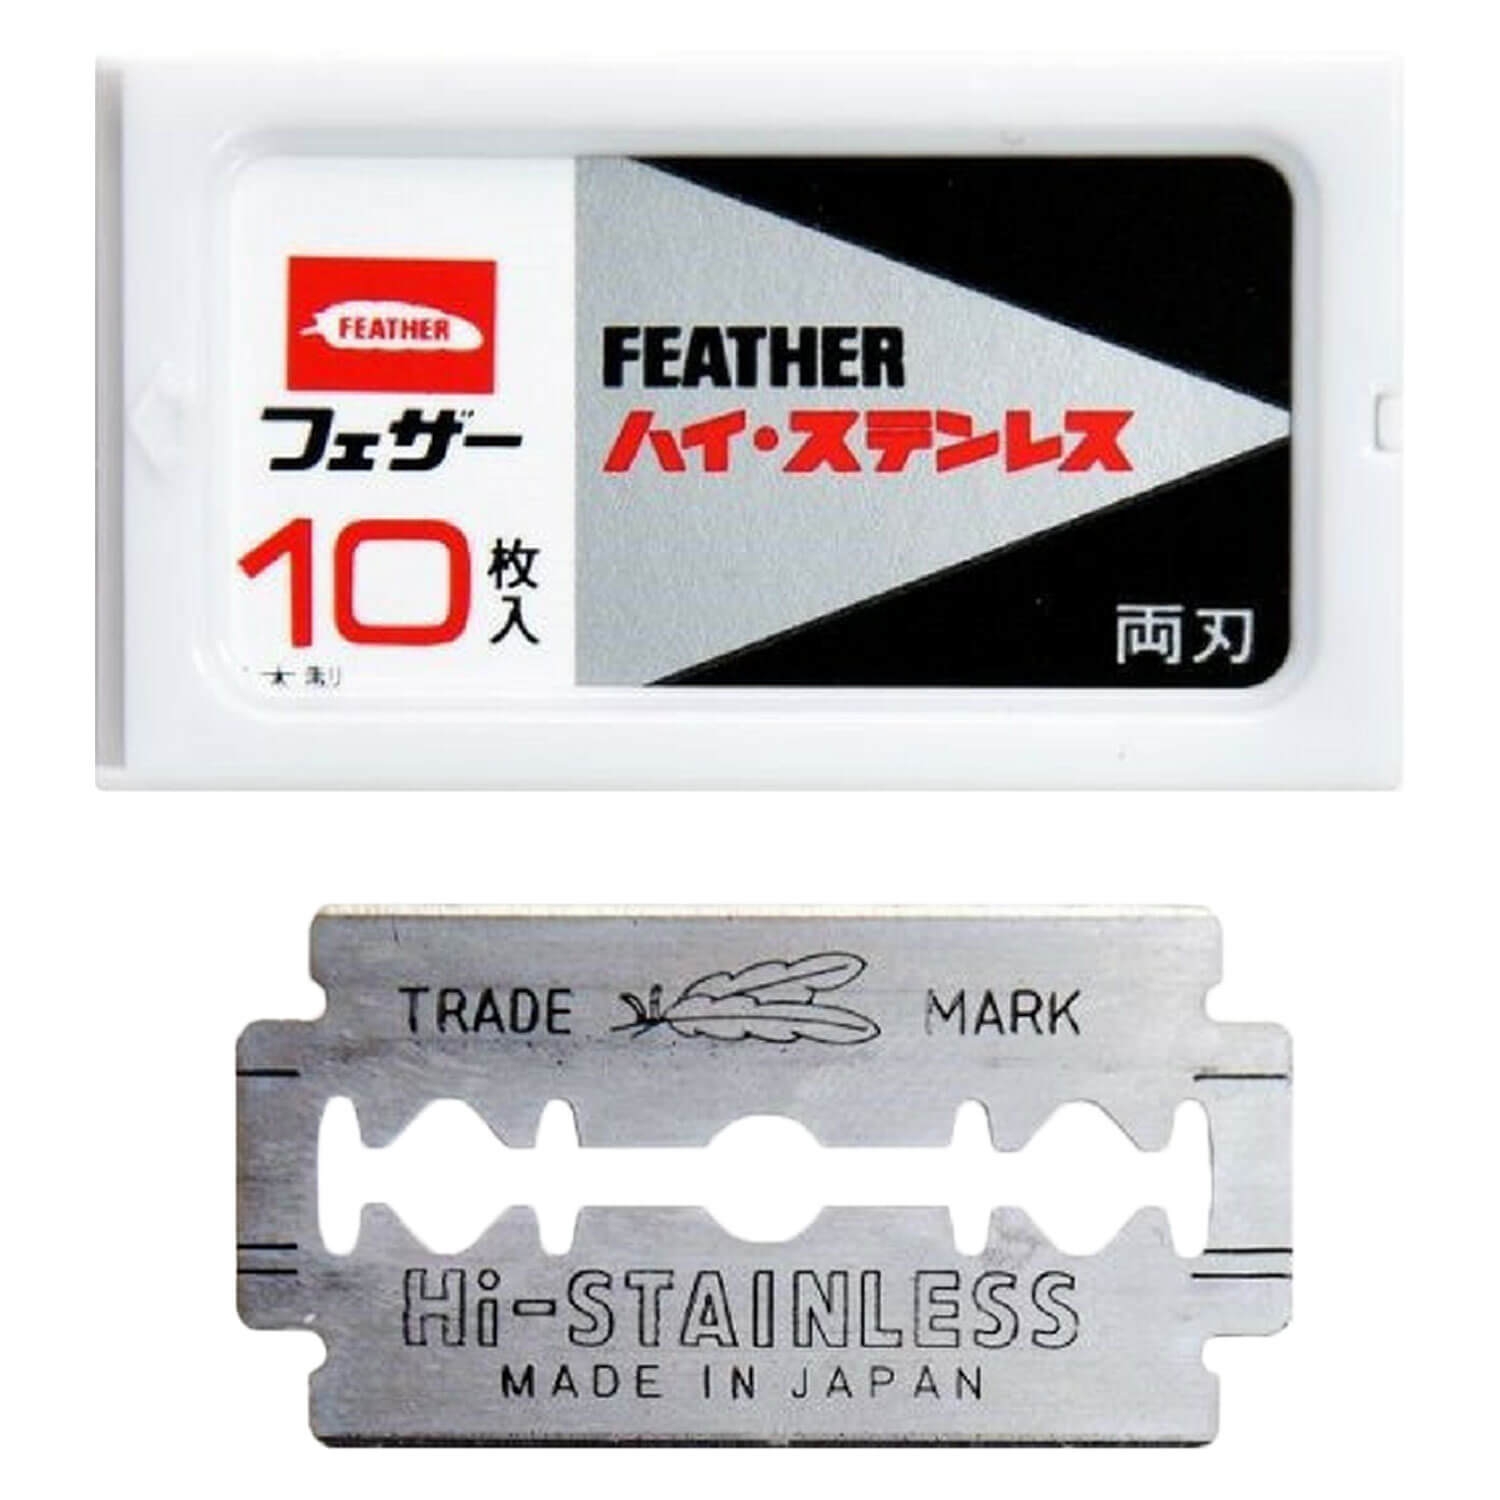 Product image from Capt. Fawcett Tools - Feather Platinum Coated Blades